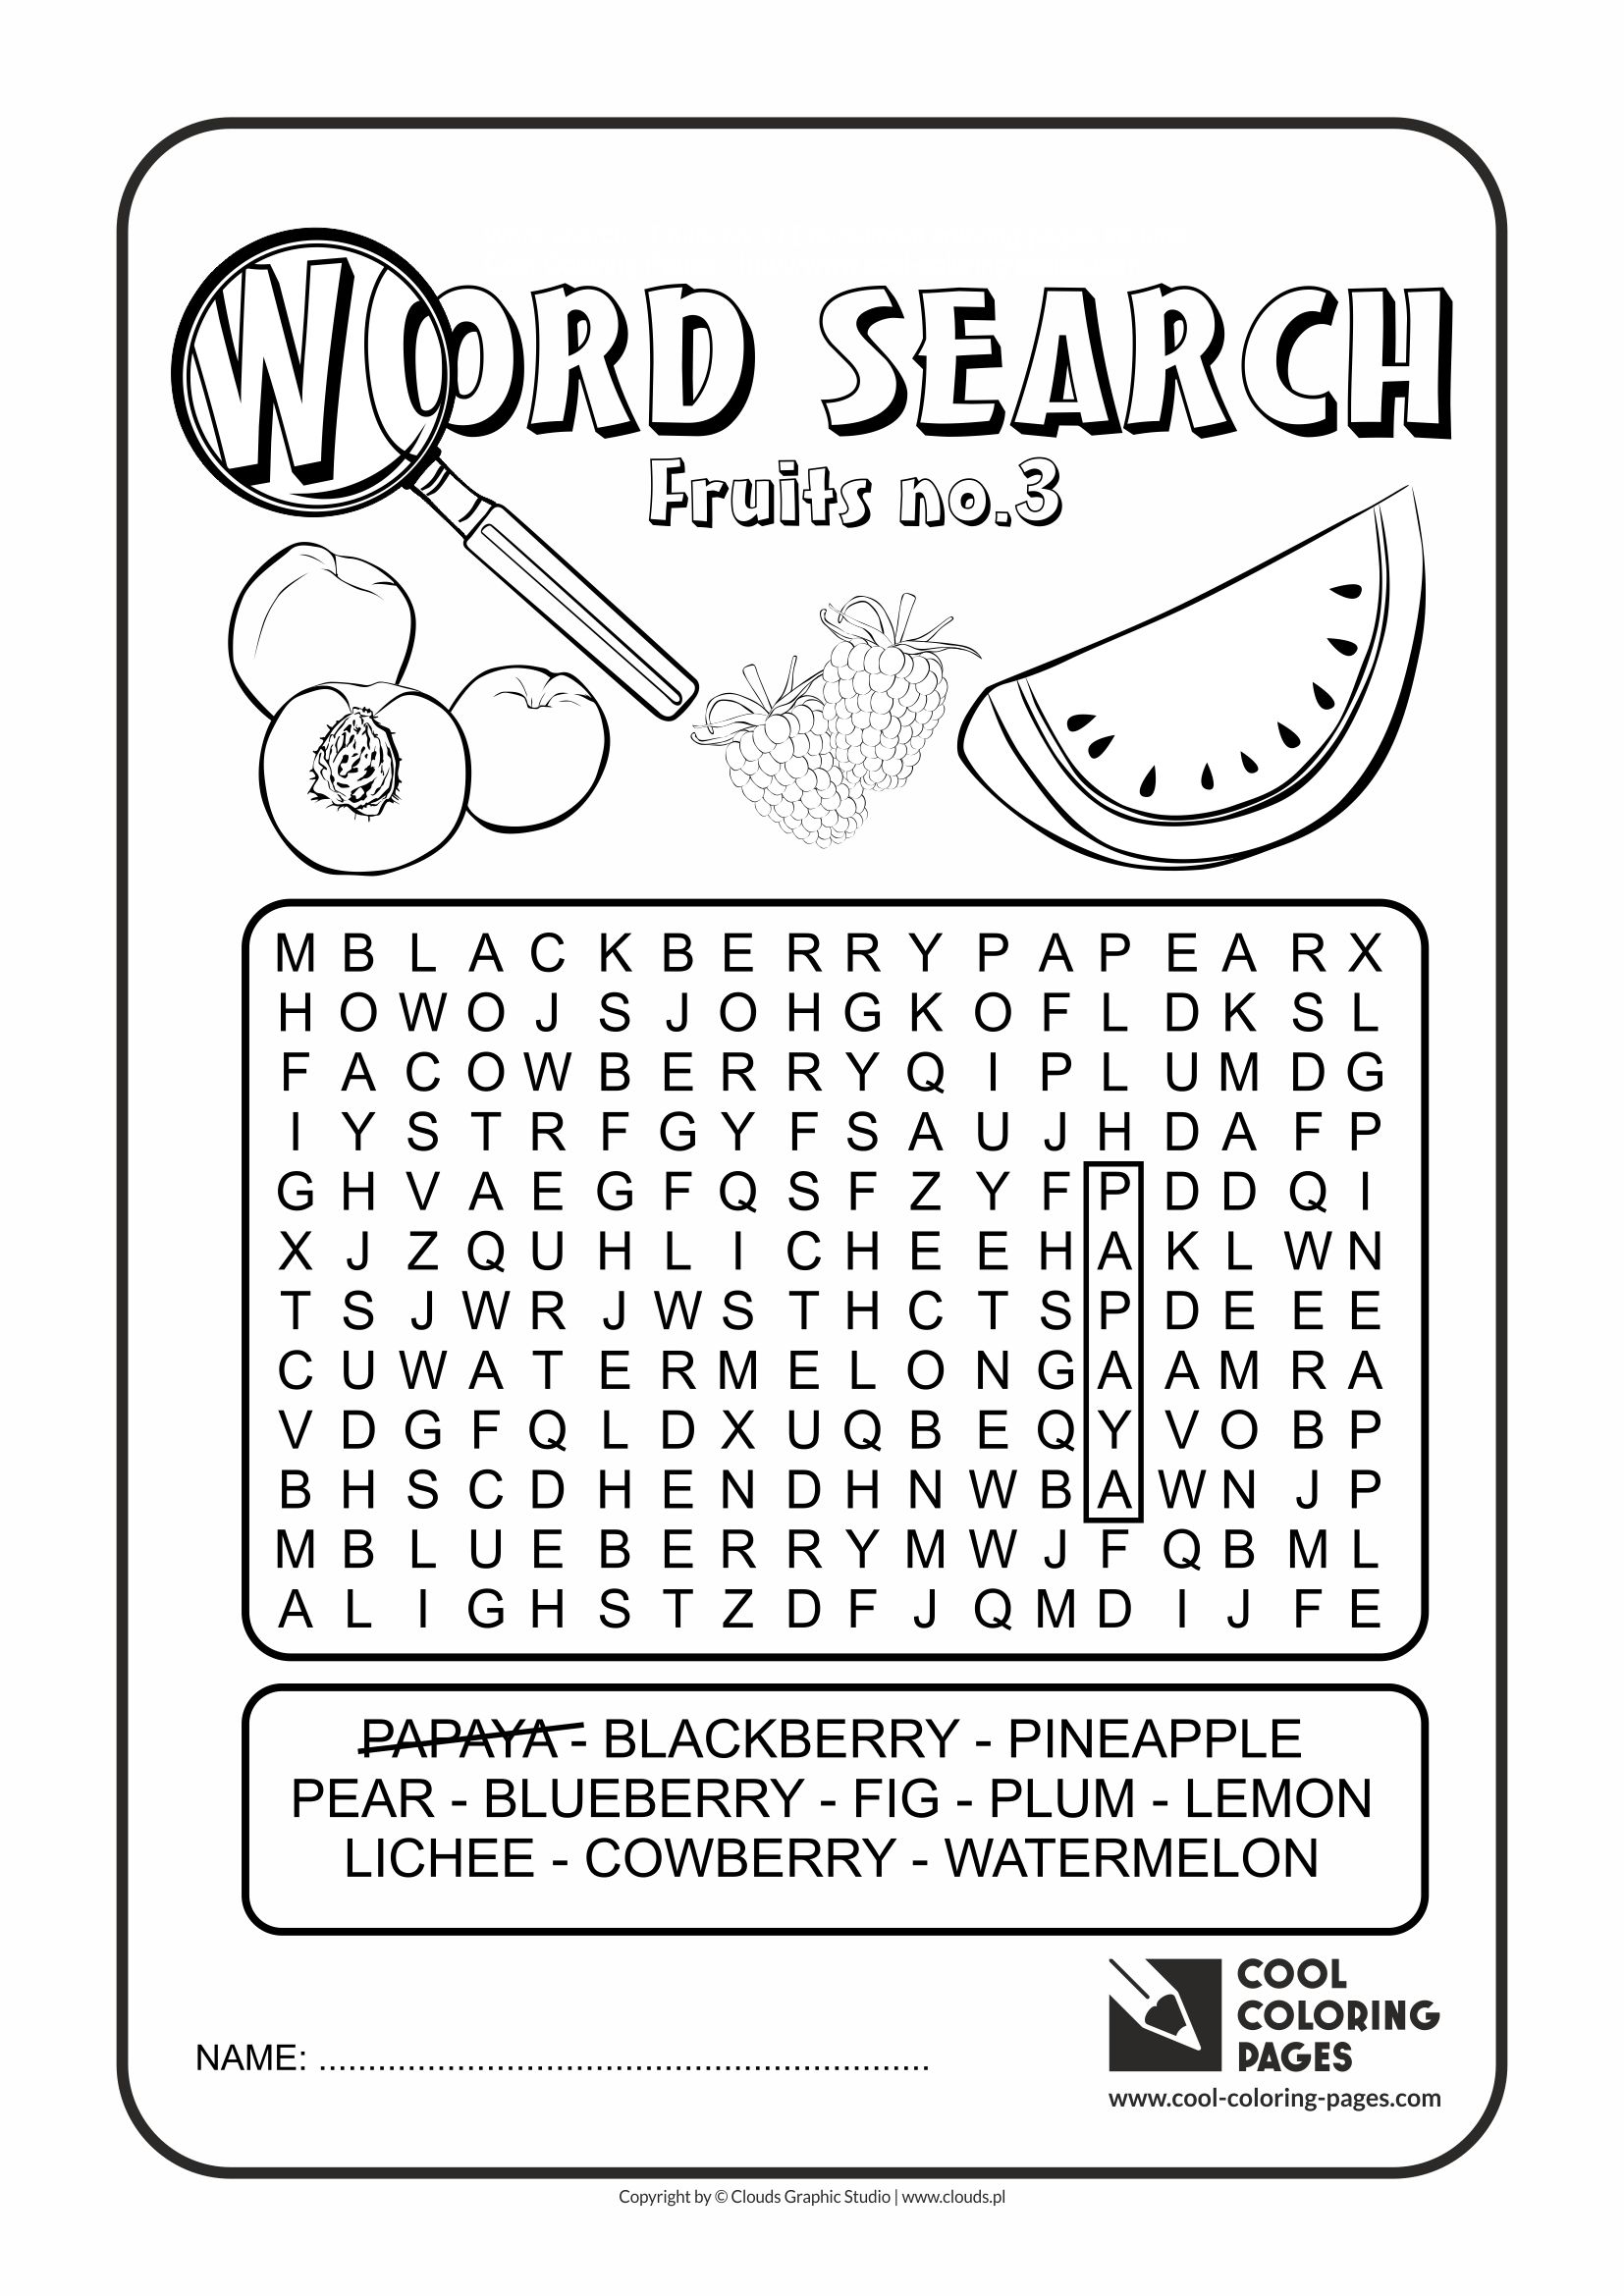 Download Cool Coloring Pages Word Search - Cool Coloring Pages | Free educational coloring pages and ...